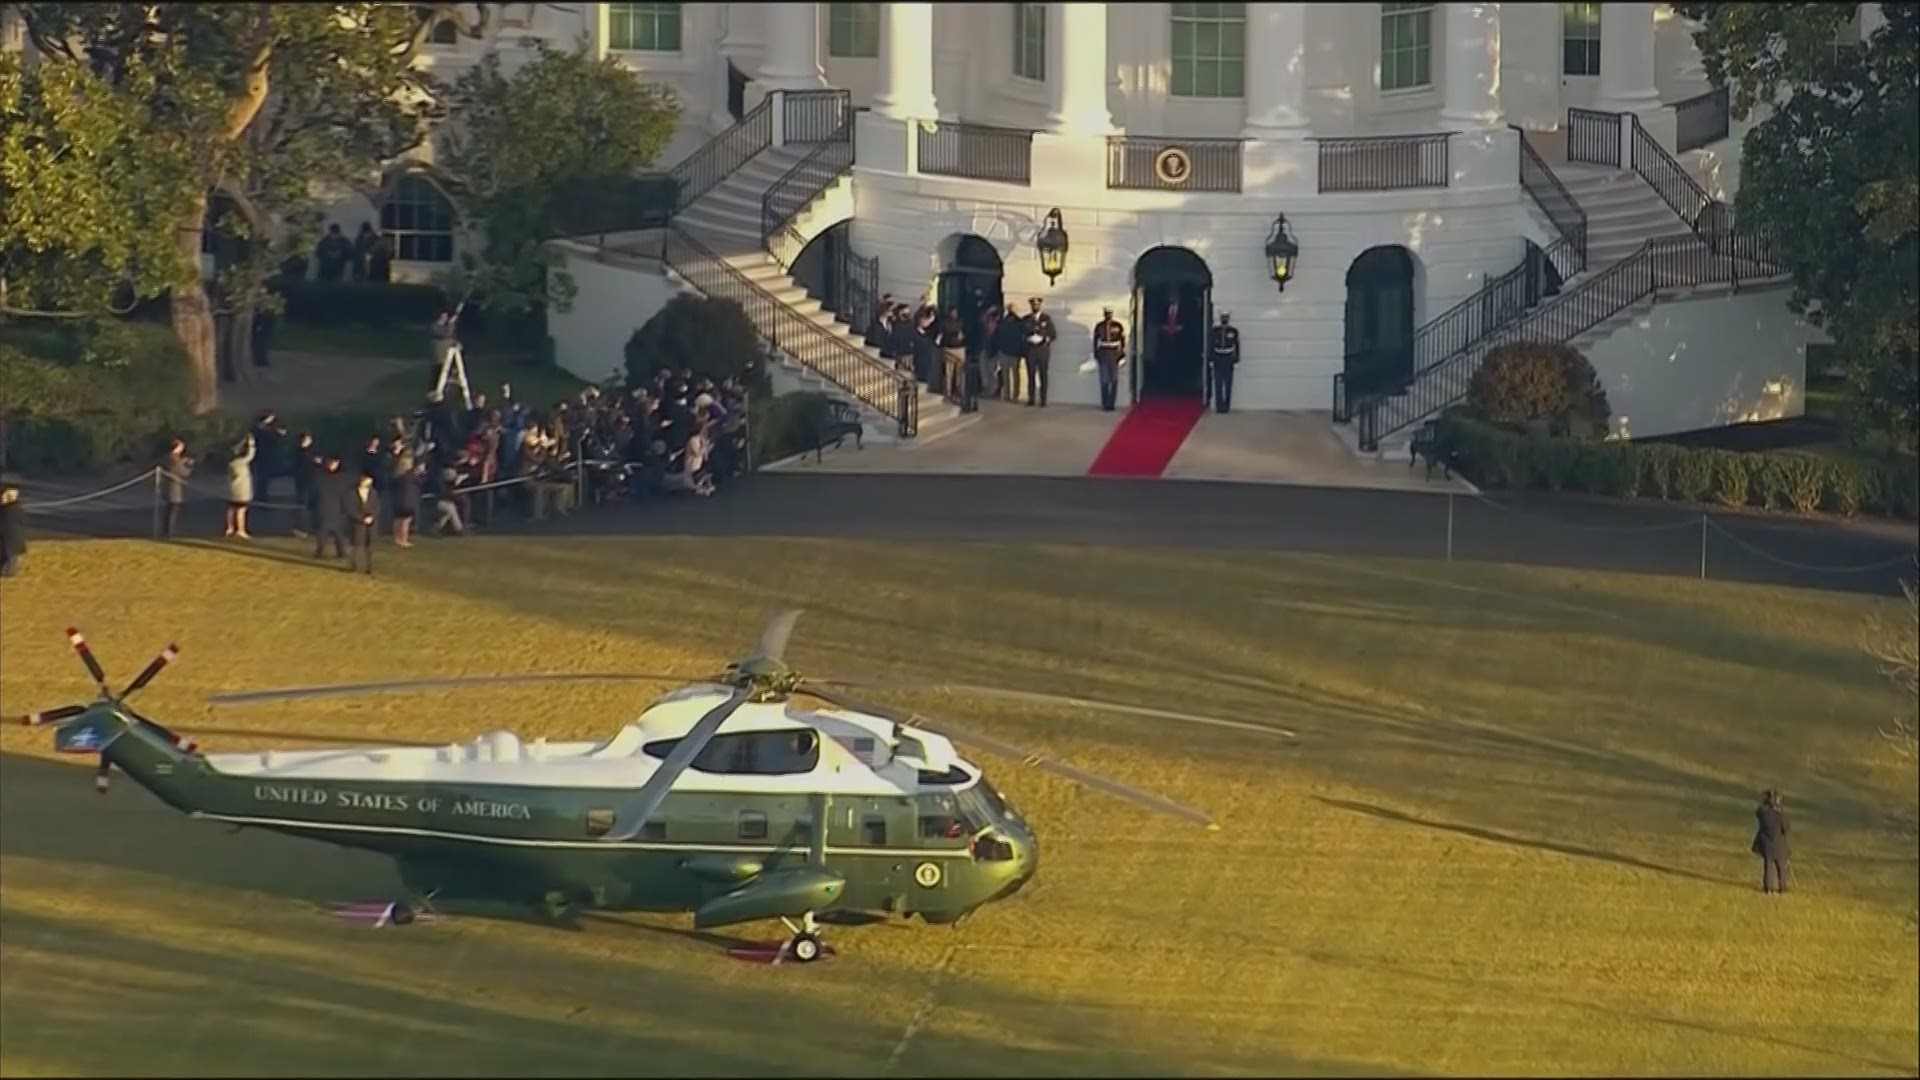 Trump emerged from the building Wednesday morning and strode across the South Lawn to board Marine One. He said, “It’s been a great honor, the honor of a lifetime.”